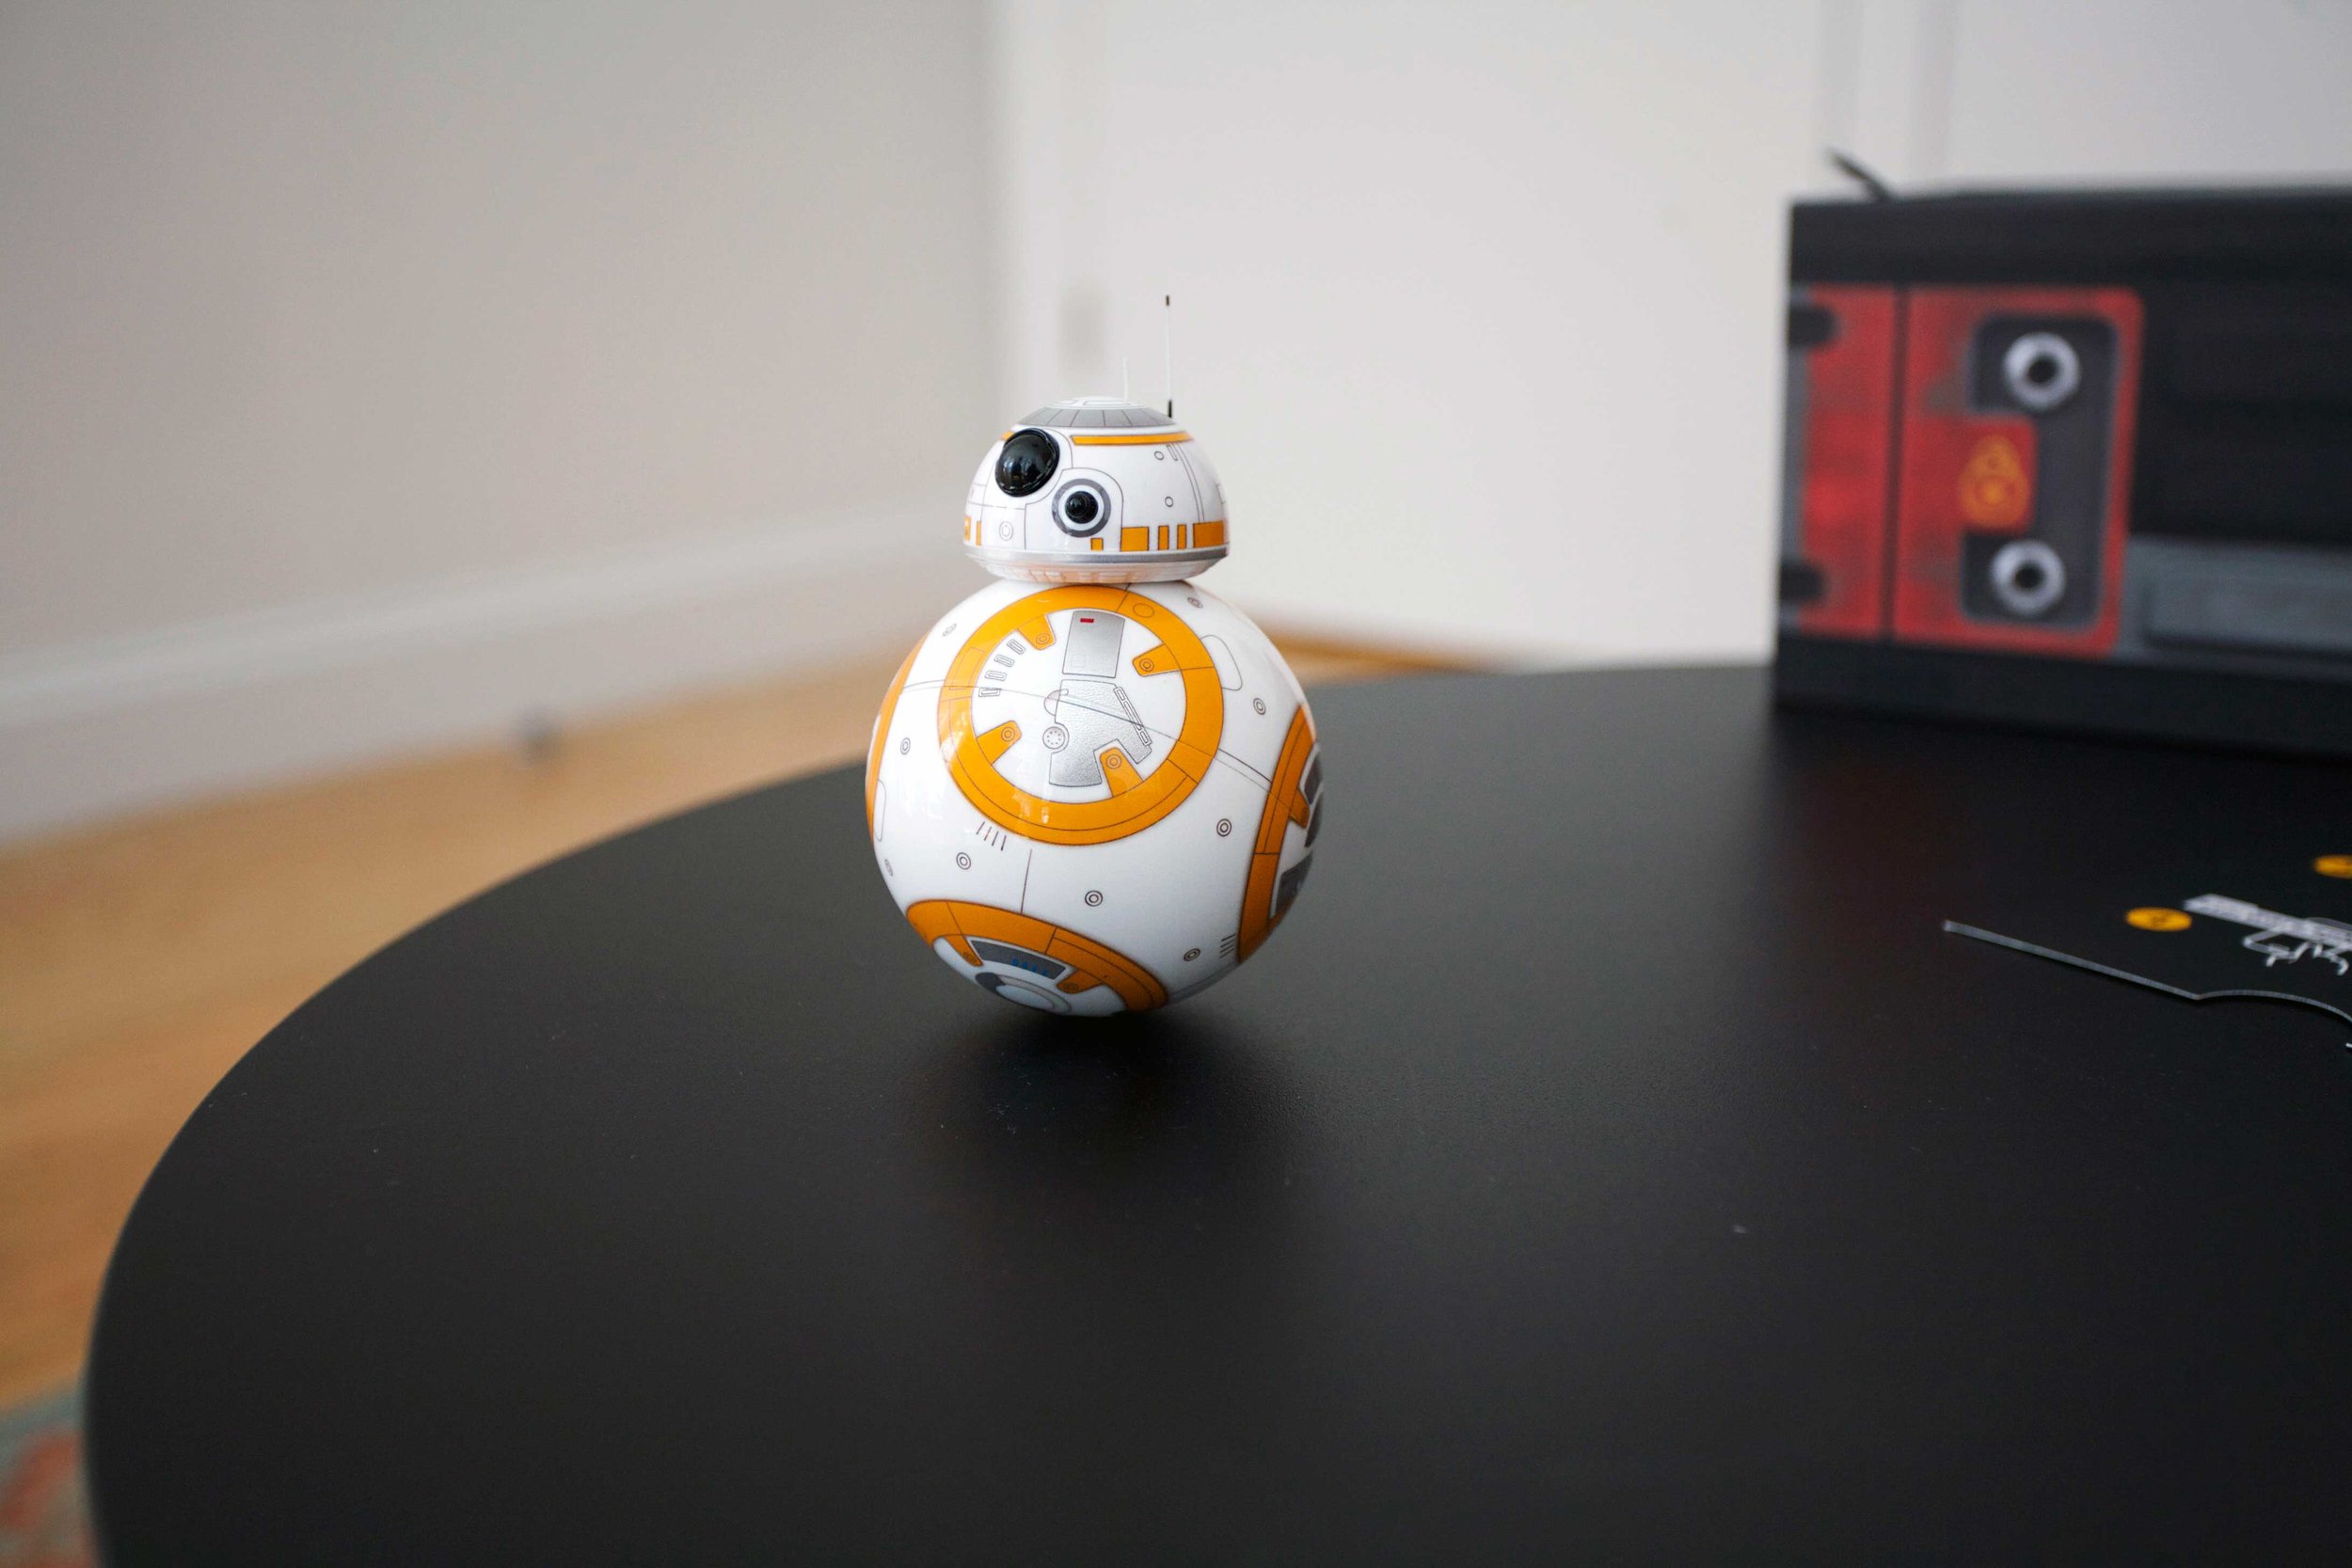   Fortune.com    How Sphero brought a Star Wars droid from screen to toy . 